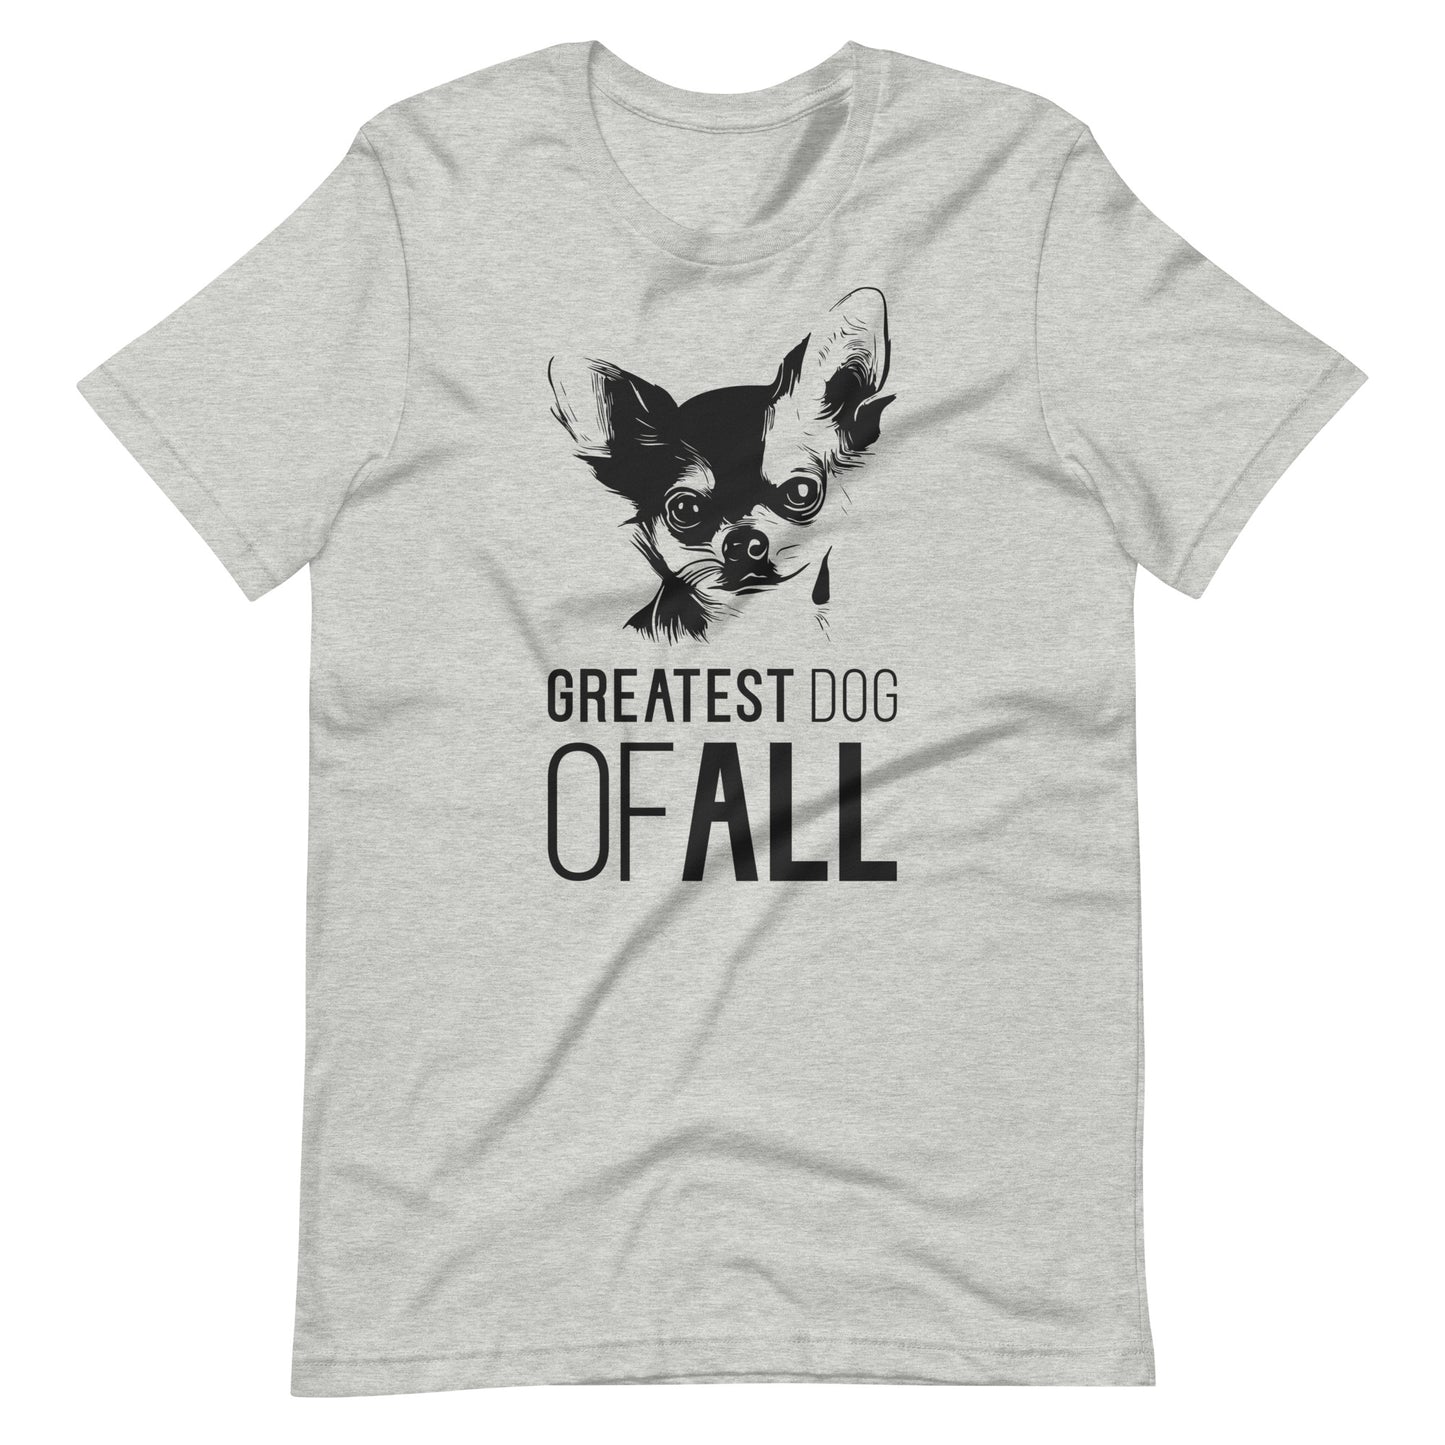 Black Chihuahua face silhouette with Greatest Dog of All caption on unisex athletic heather t-shirt